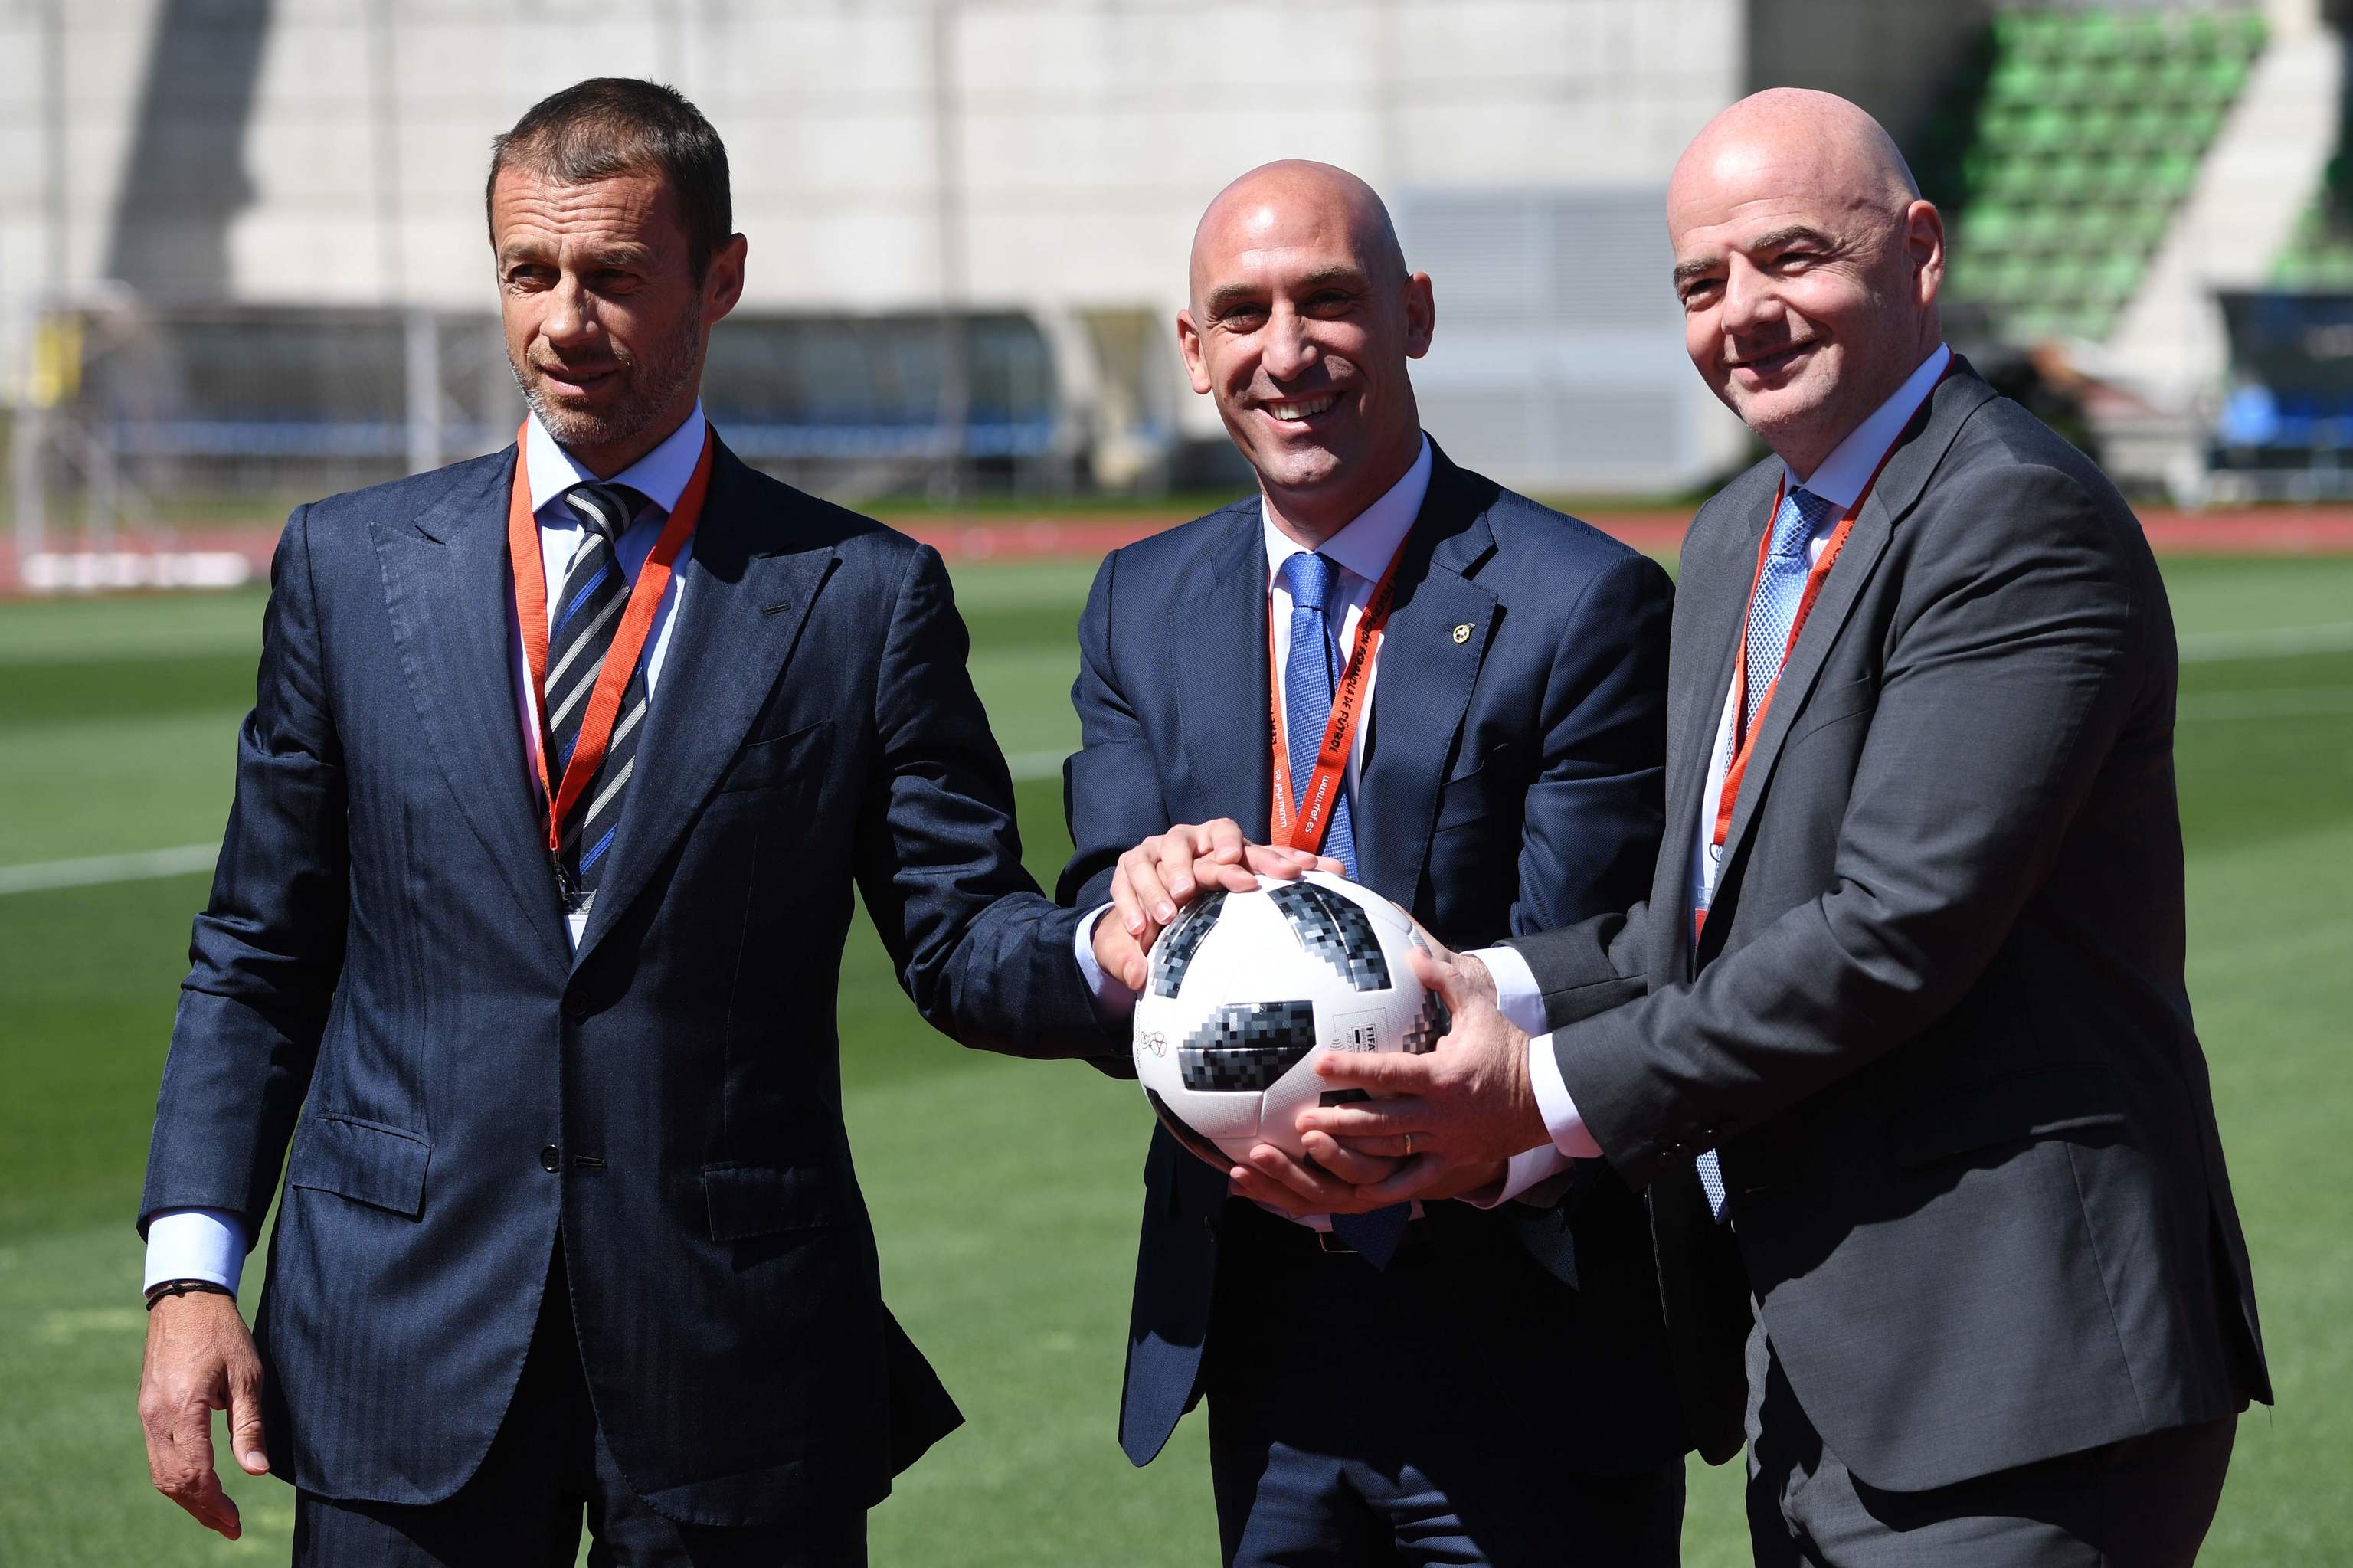 Ceferin (UEFA), Rubiales (RFEF) and Infantino (FIFA).